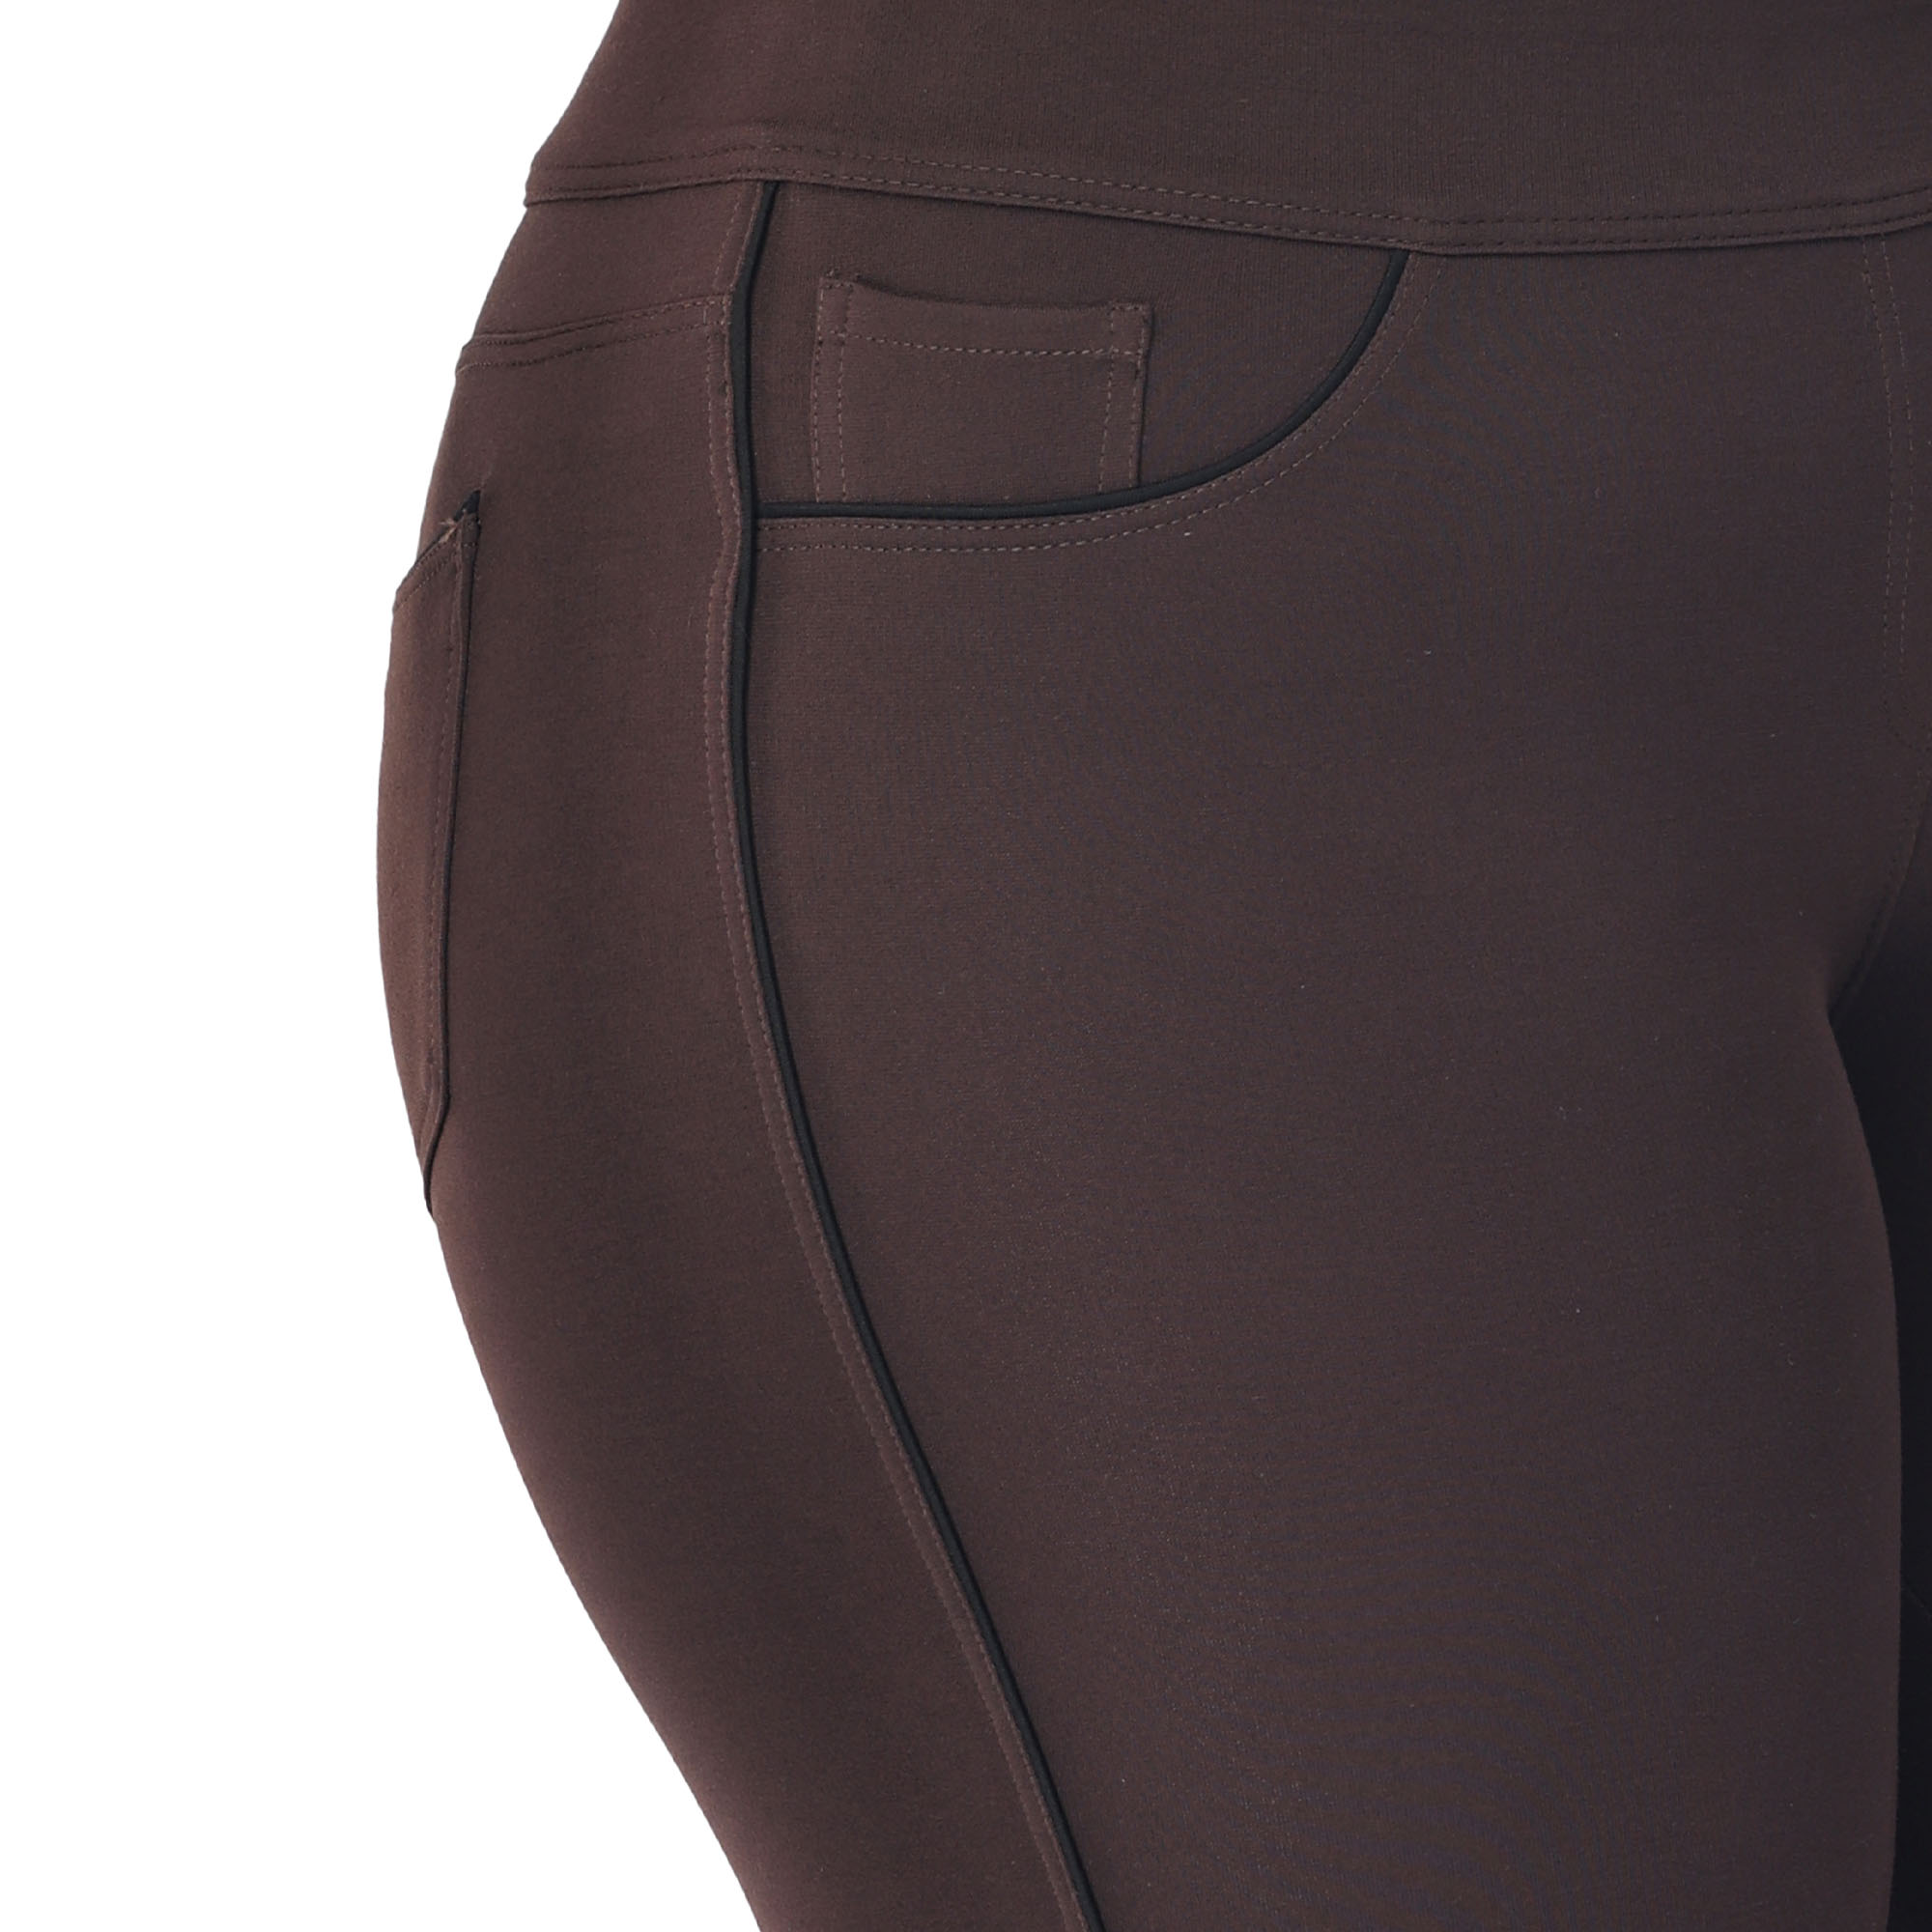 Brown capris with piping women gym wear Low rise - Belore Slims